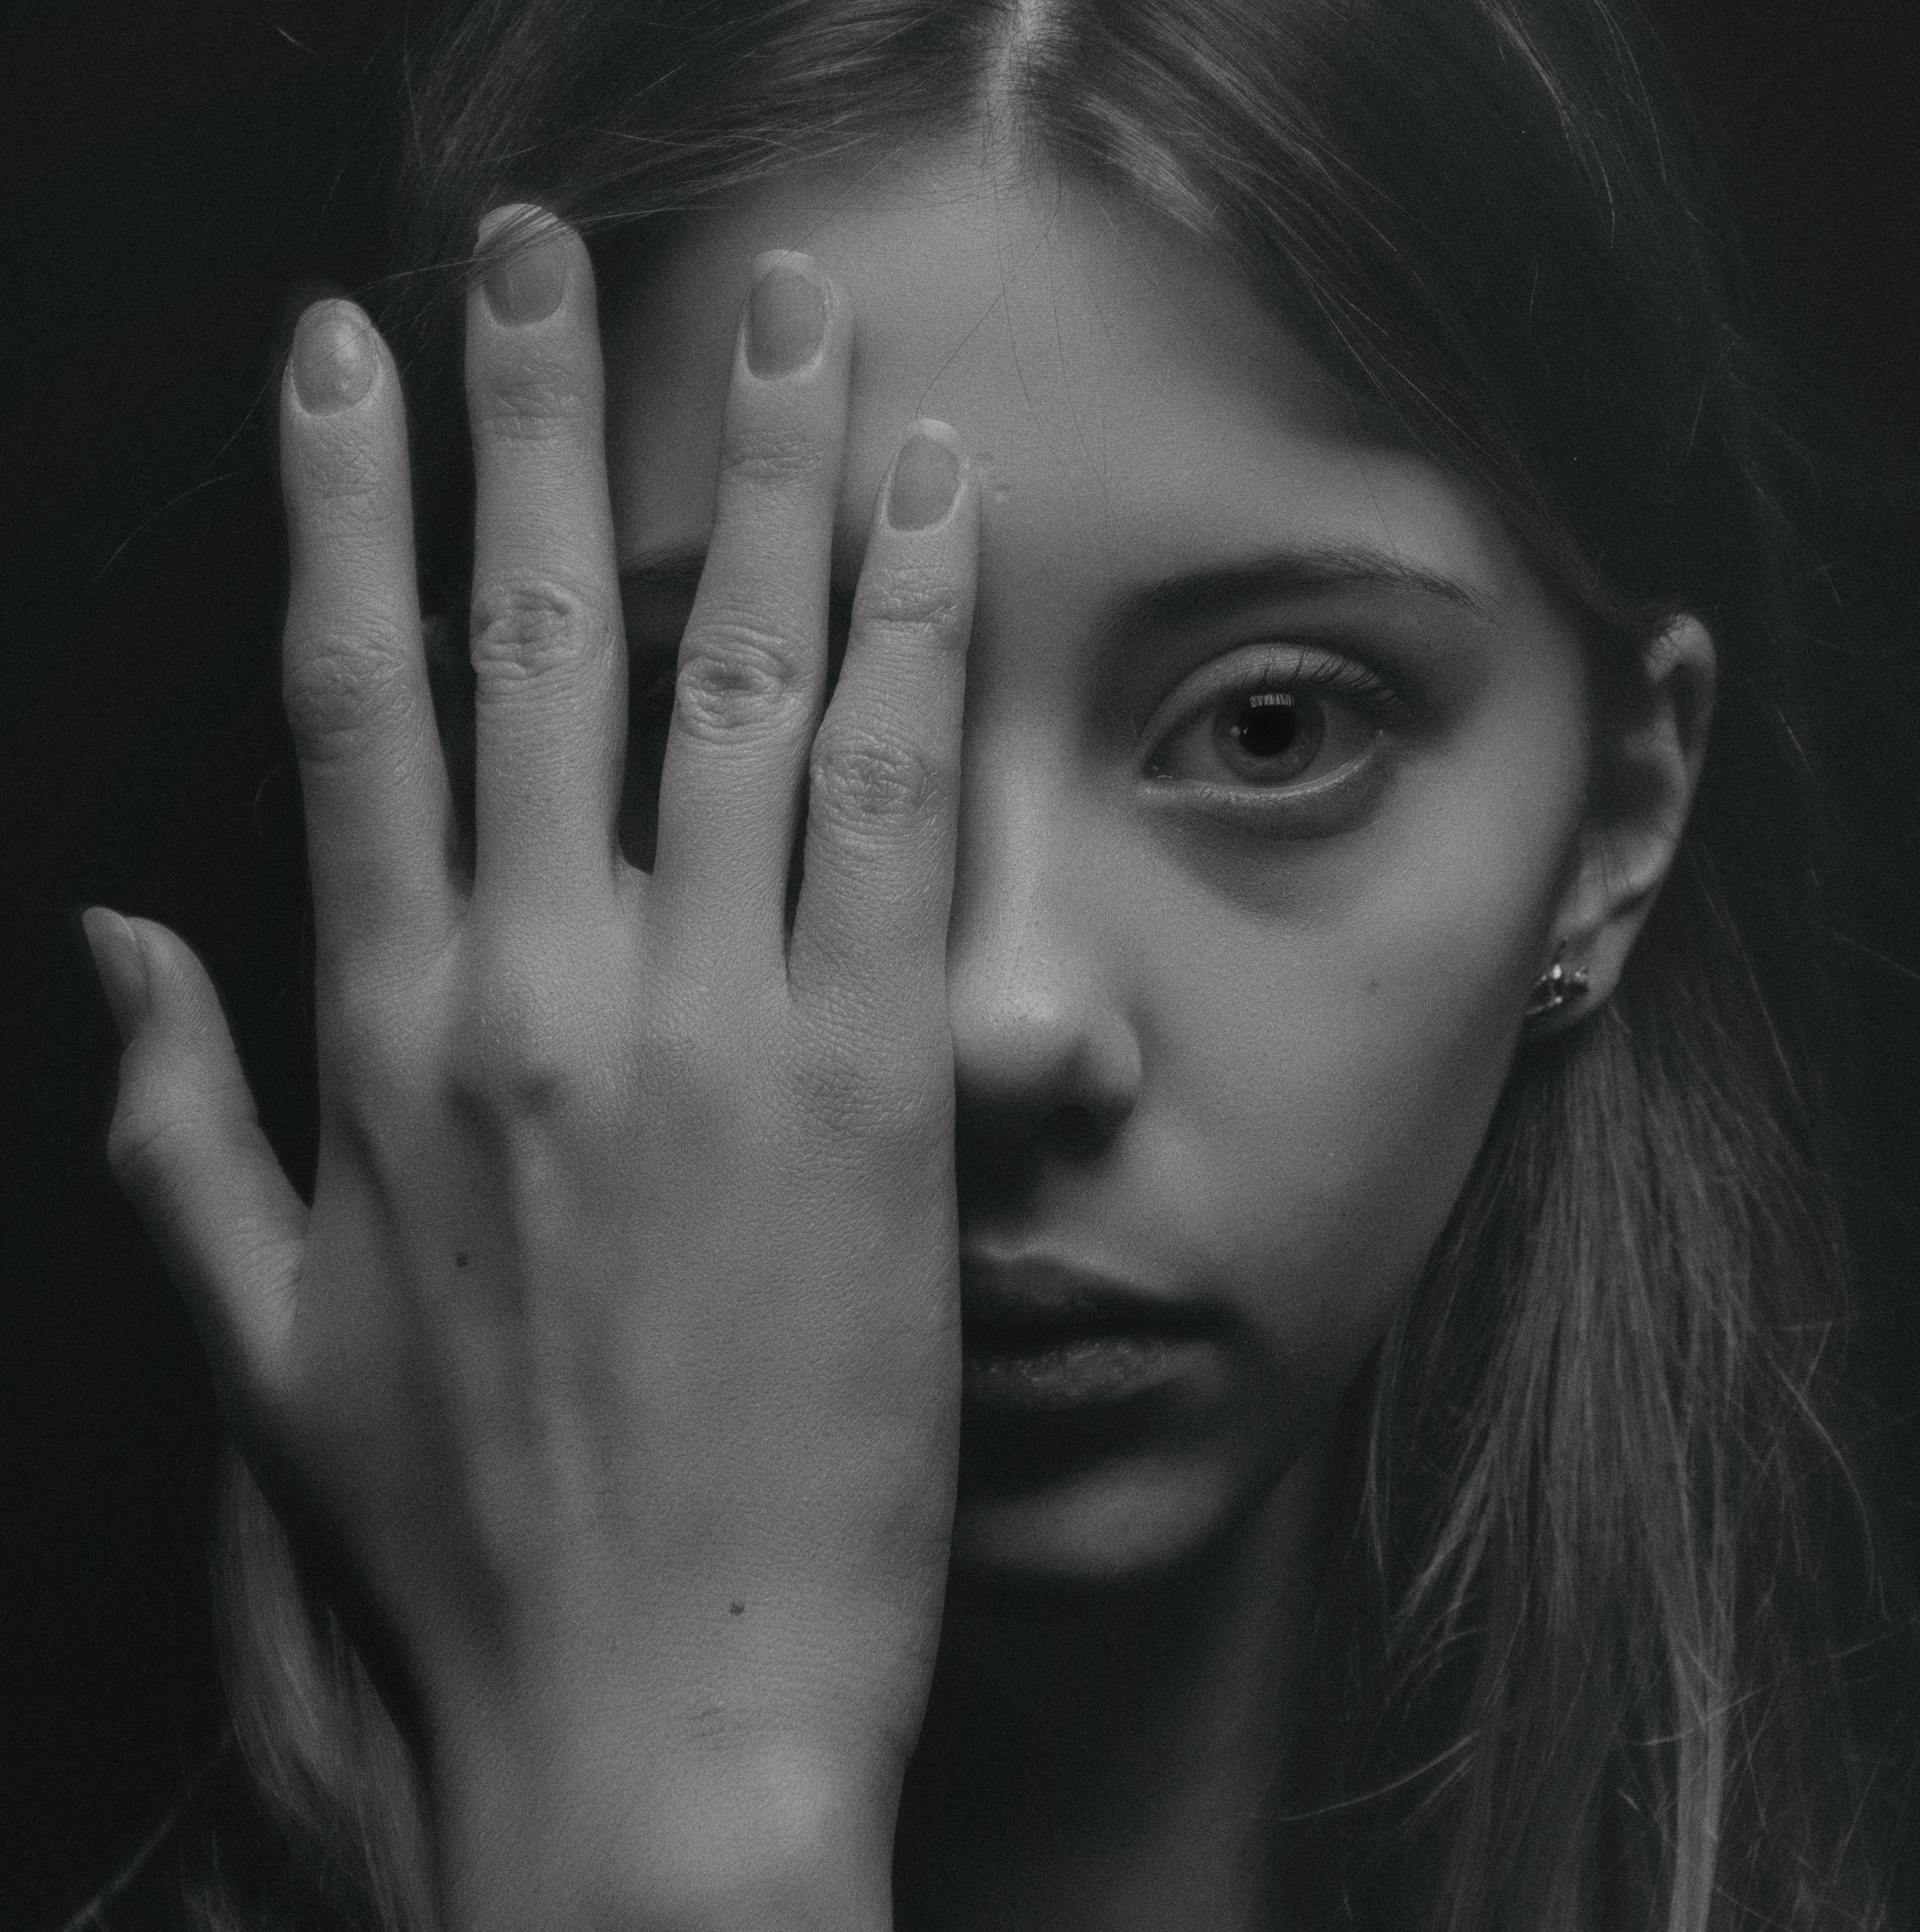 A grayscale photo of a woman covering half of her face with her hand | Source: Pexels